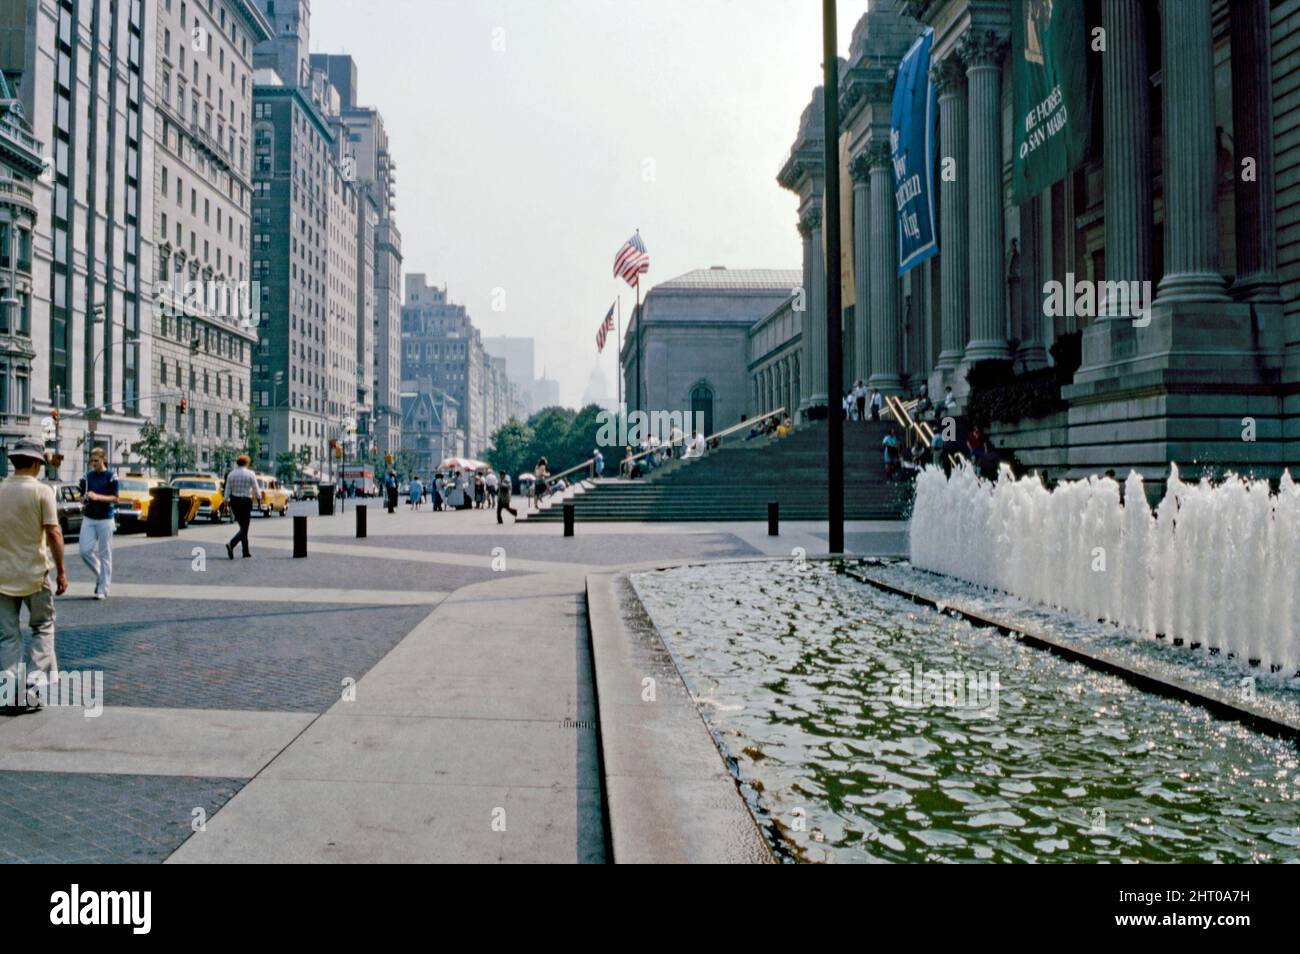 A 1980 view looking south down Fifth Avenue at The Metropolitan Museum of Art, New York City, USA. The Metropolitan Museum of Art of New York City (‘The Met’) is the largest art museum in the Western Hemisphere. The main building at 1000 Fifth Avenue on the eastern edge of Central Park on Manhattan's Upper East Side. The Metropolitan Museum of Art was founded in 1870 with its mission to bring art and art education to the American people. The Fifth Avenue building opened in 1872. This image is from an old Kodak colour transparency taken by an amateur photographer – a vintage 1980s photograph. Stock Photo